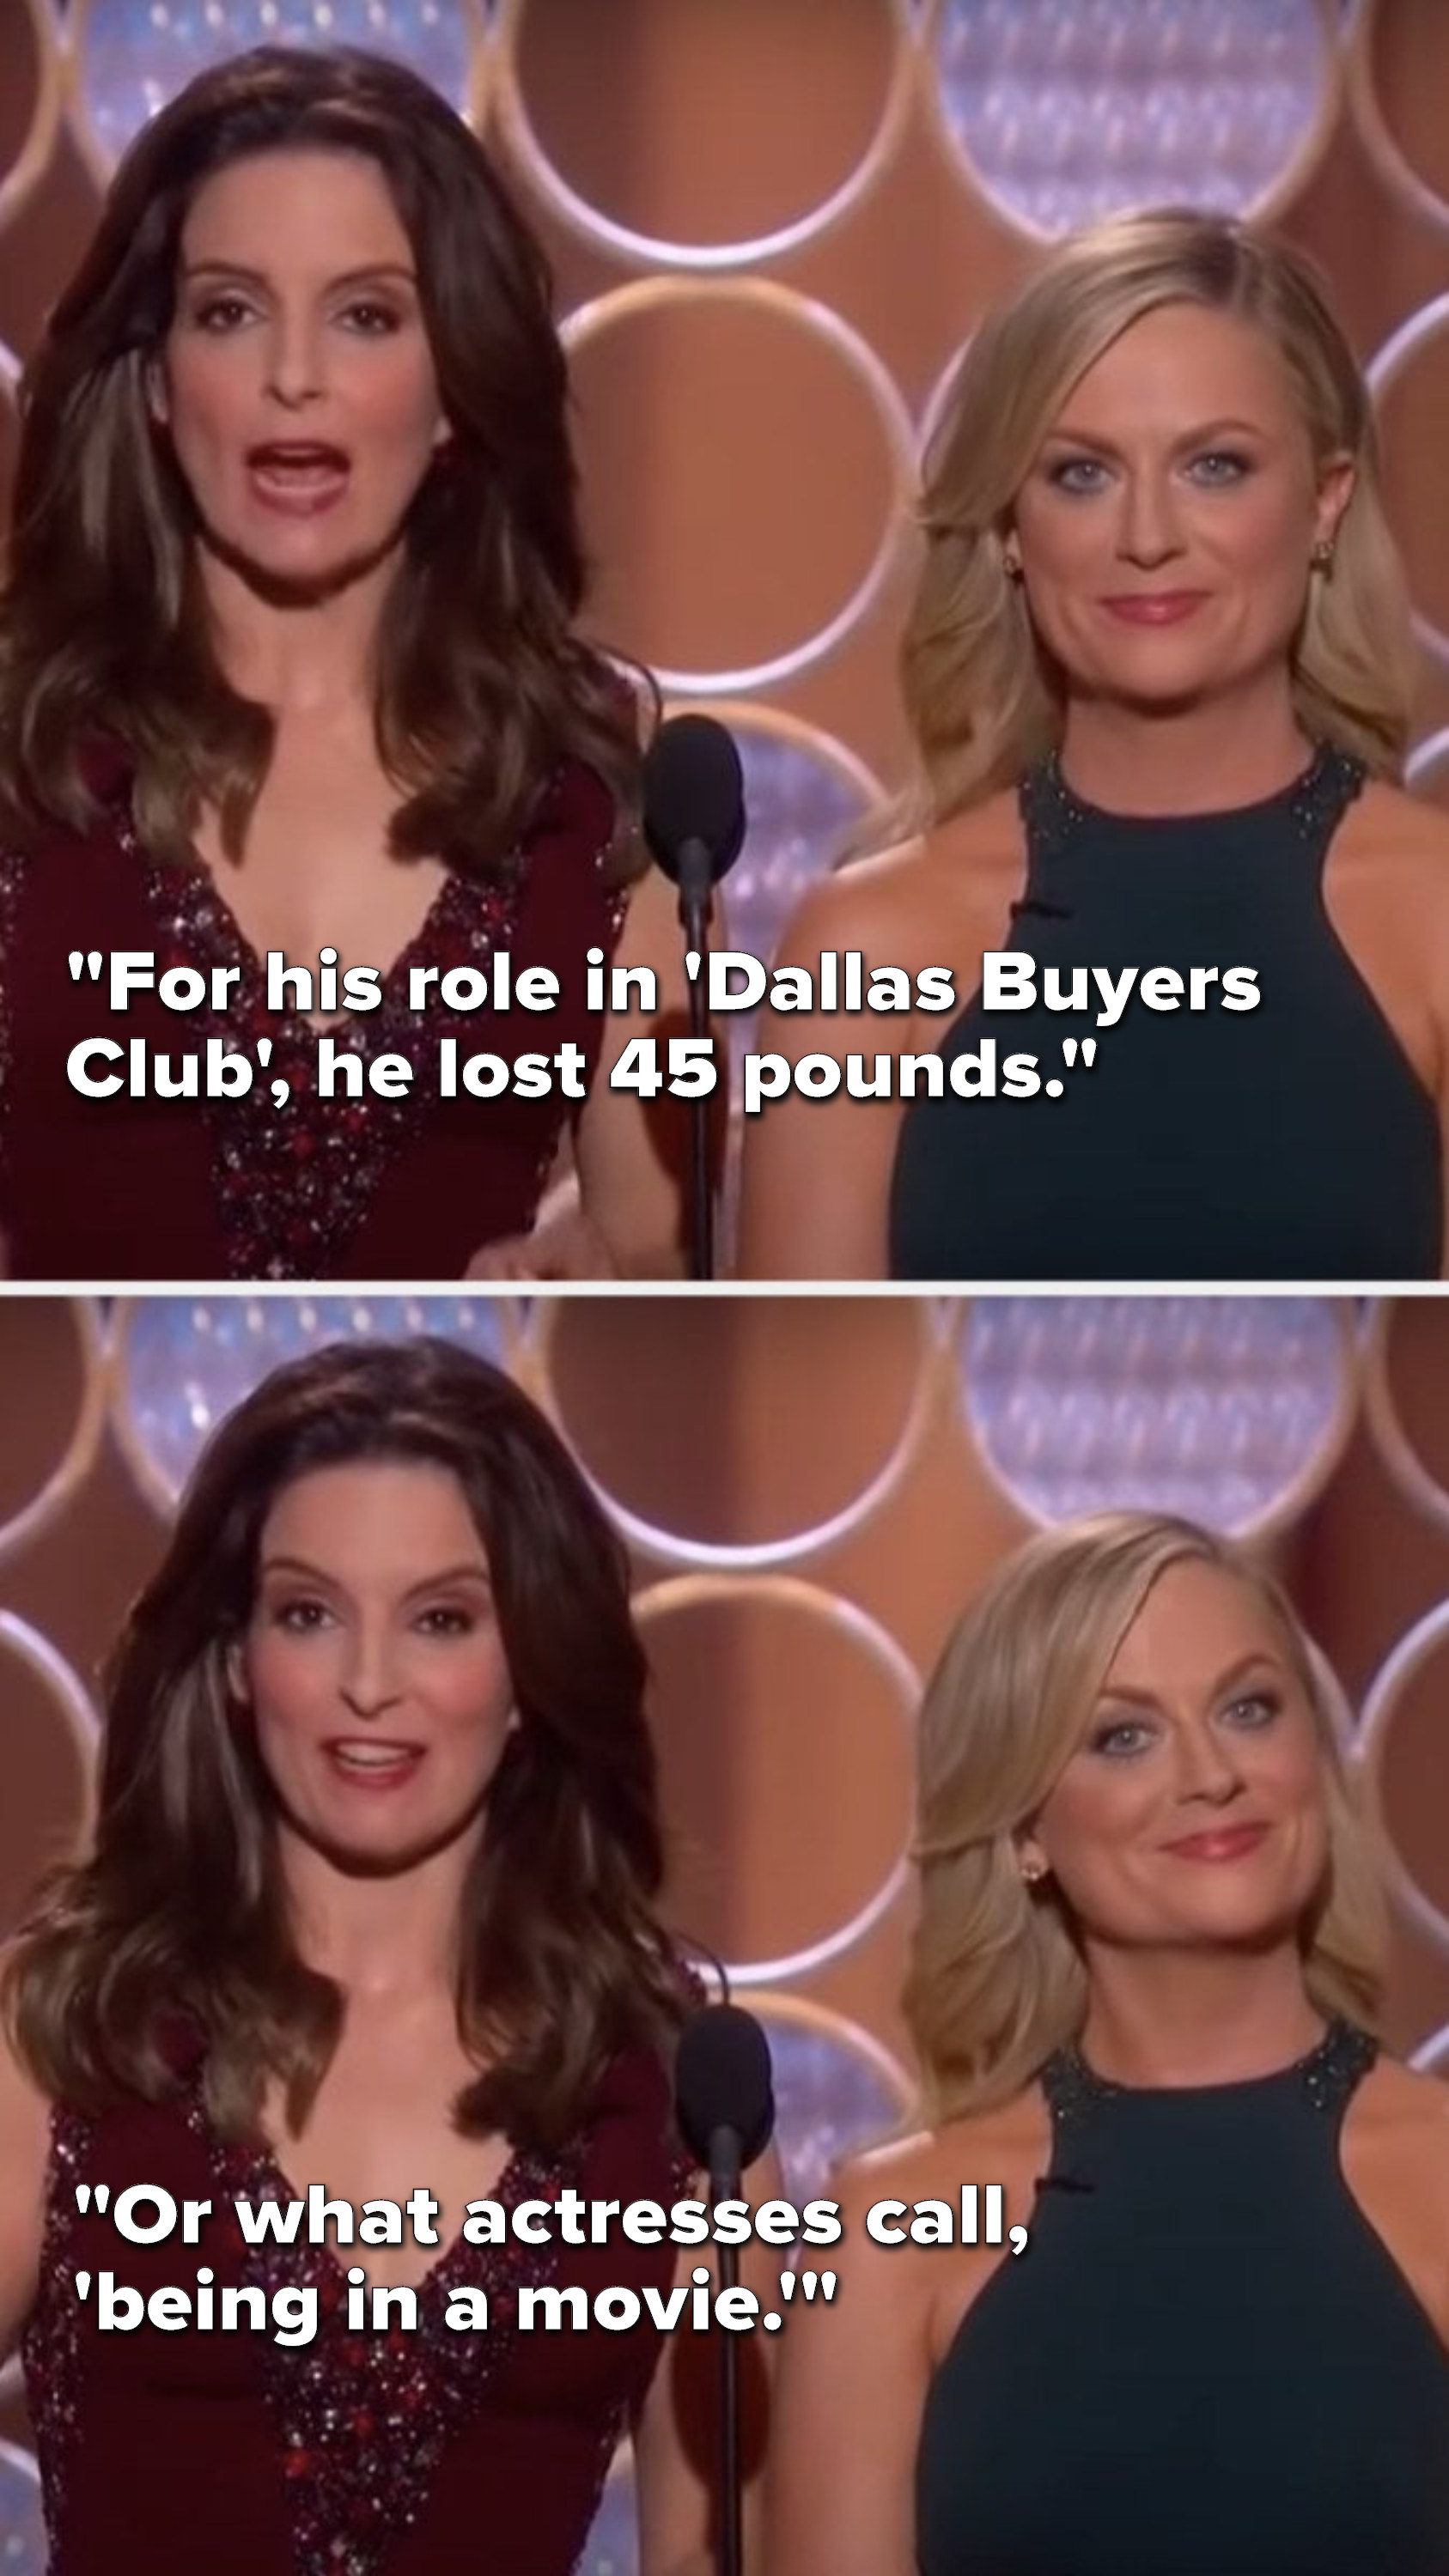 Fey says, &quot;For his role in &#x27;Dallas Buyers Club&#x27;, he lost 45 pounds, or what actresses call, &#x27;being in a movie&#x27;&quot;